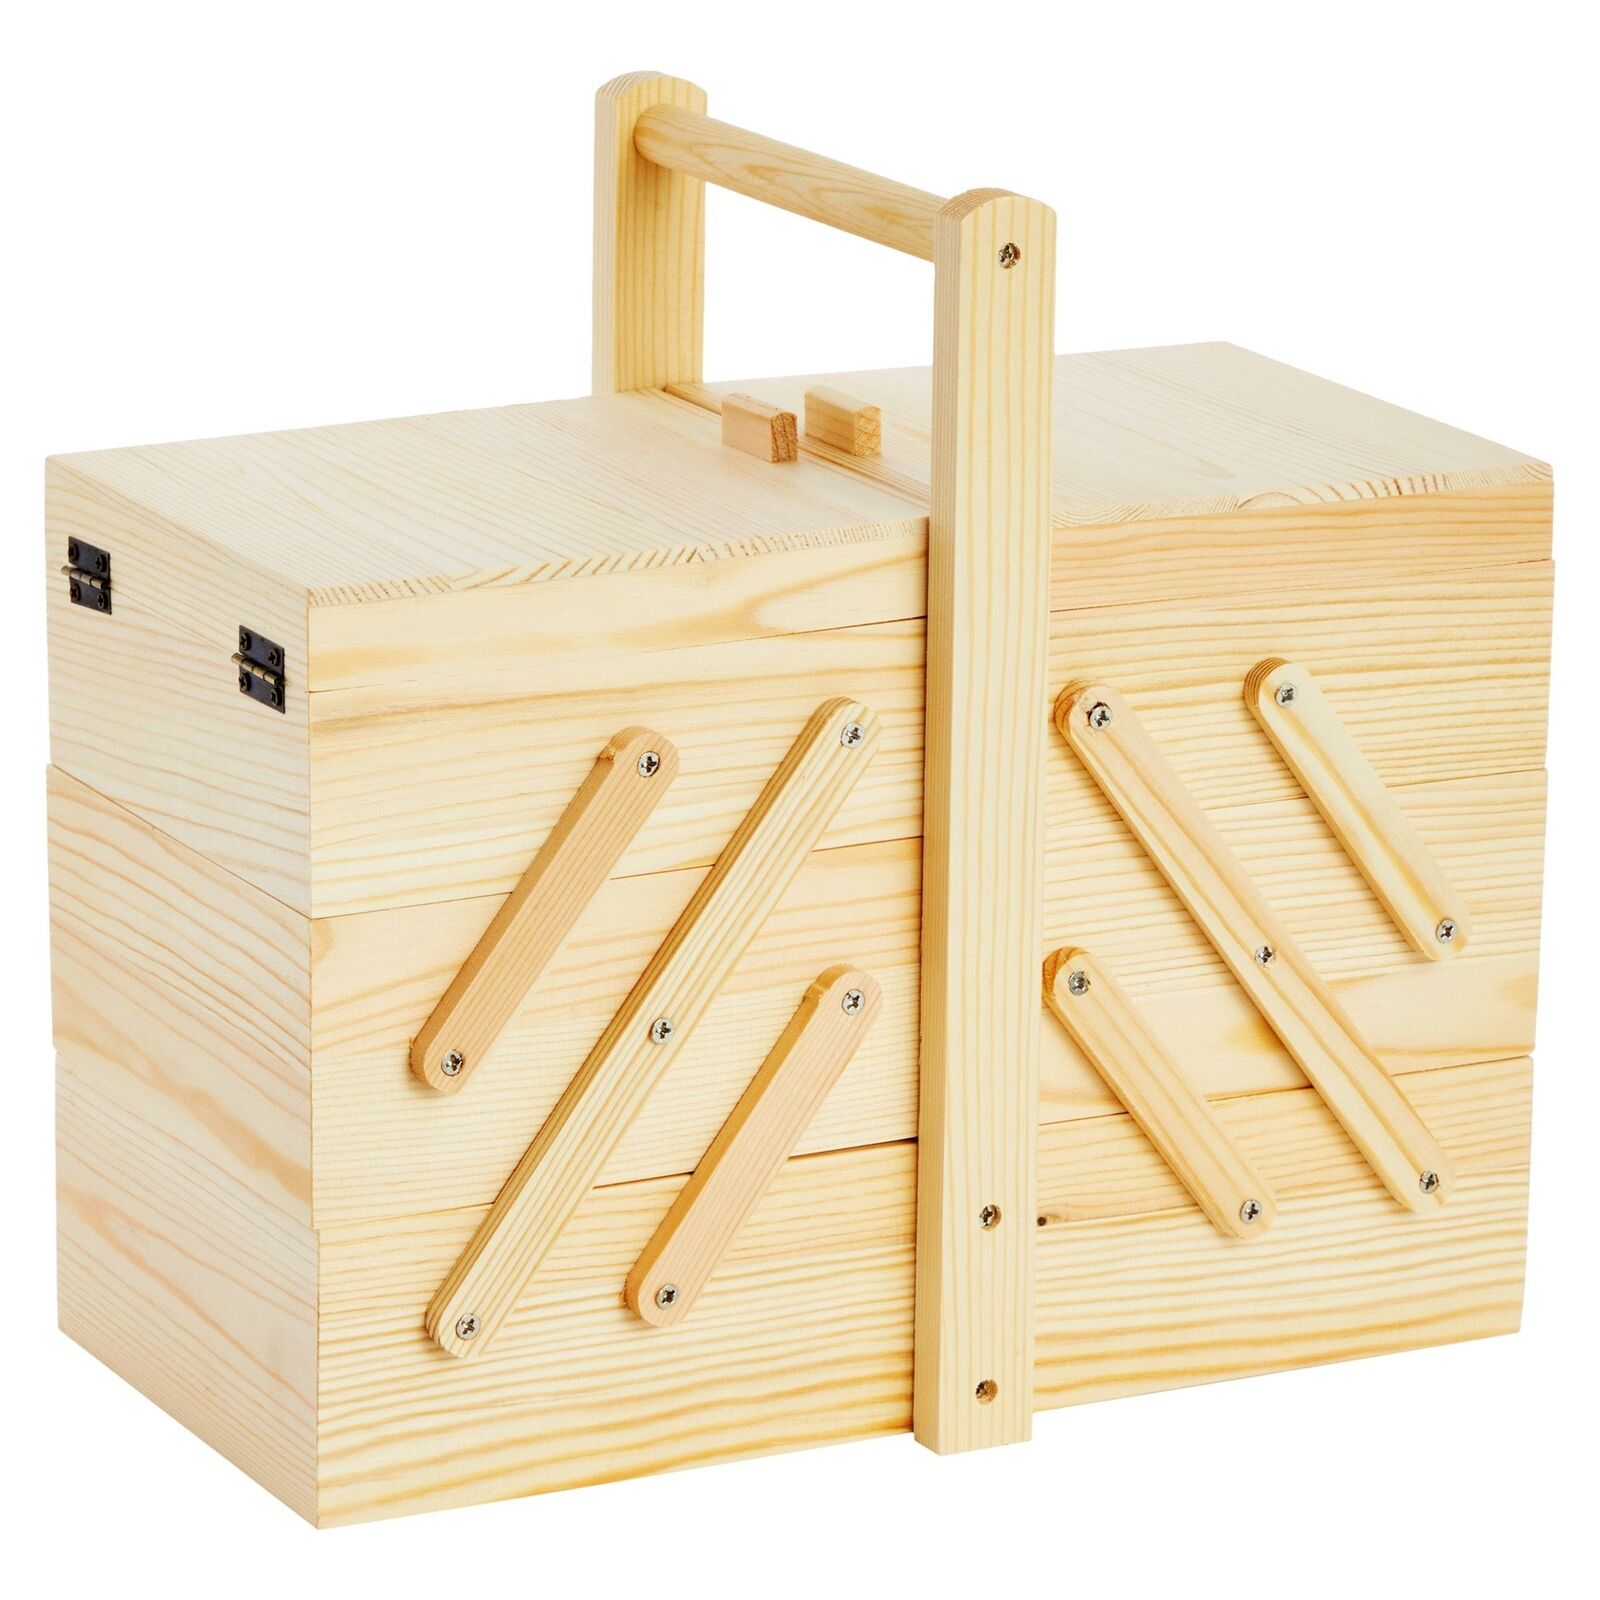 Wood Sewing Box Organizer with 3 Tier Drawers for Craft Tools, 12.6x5.9x8.3 In